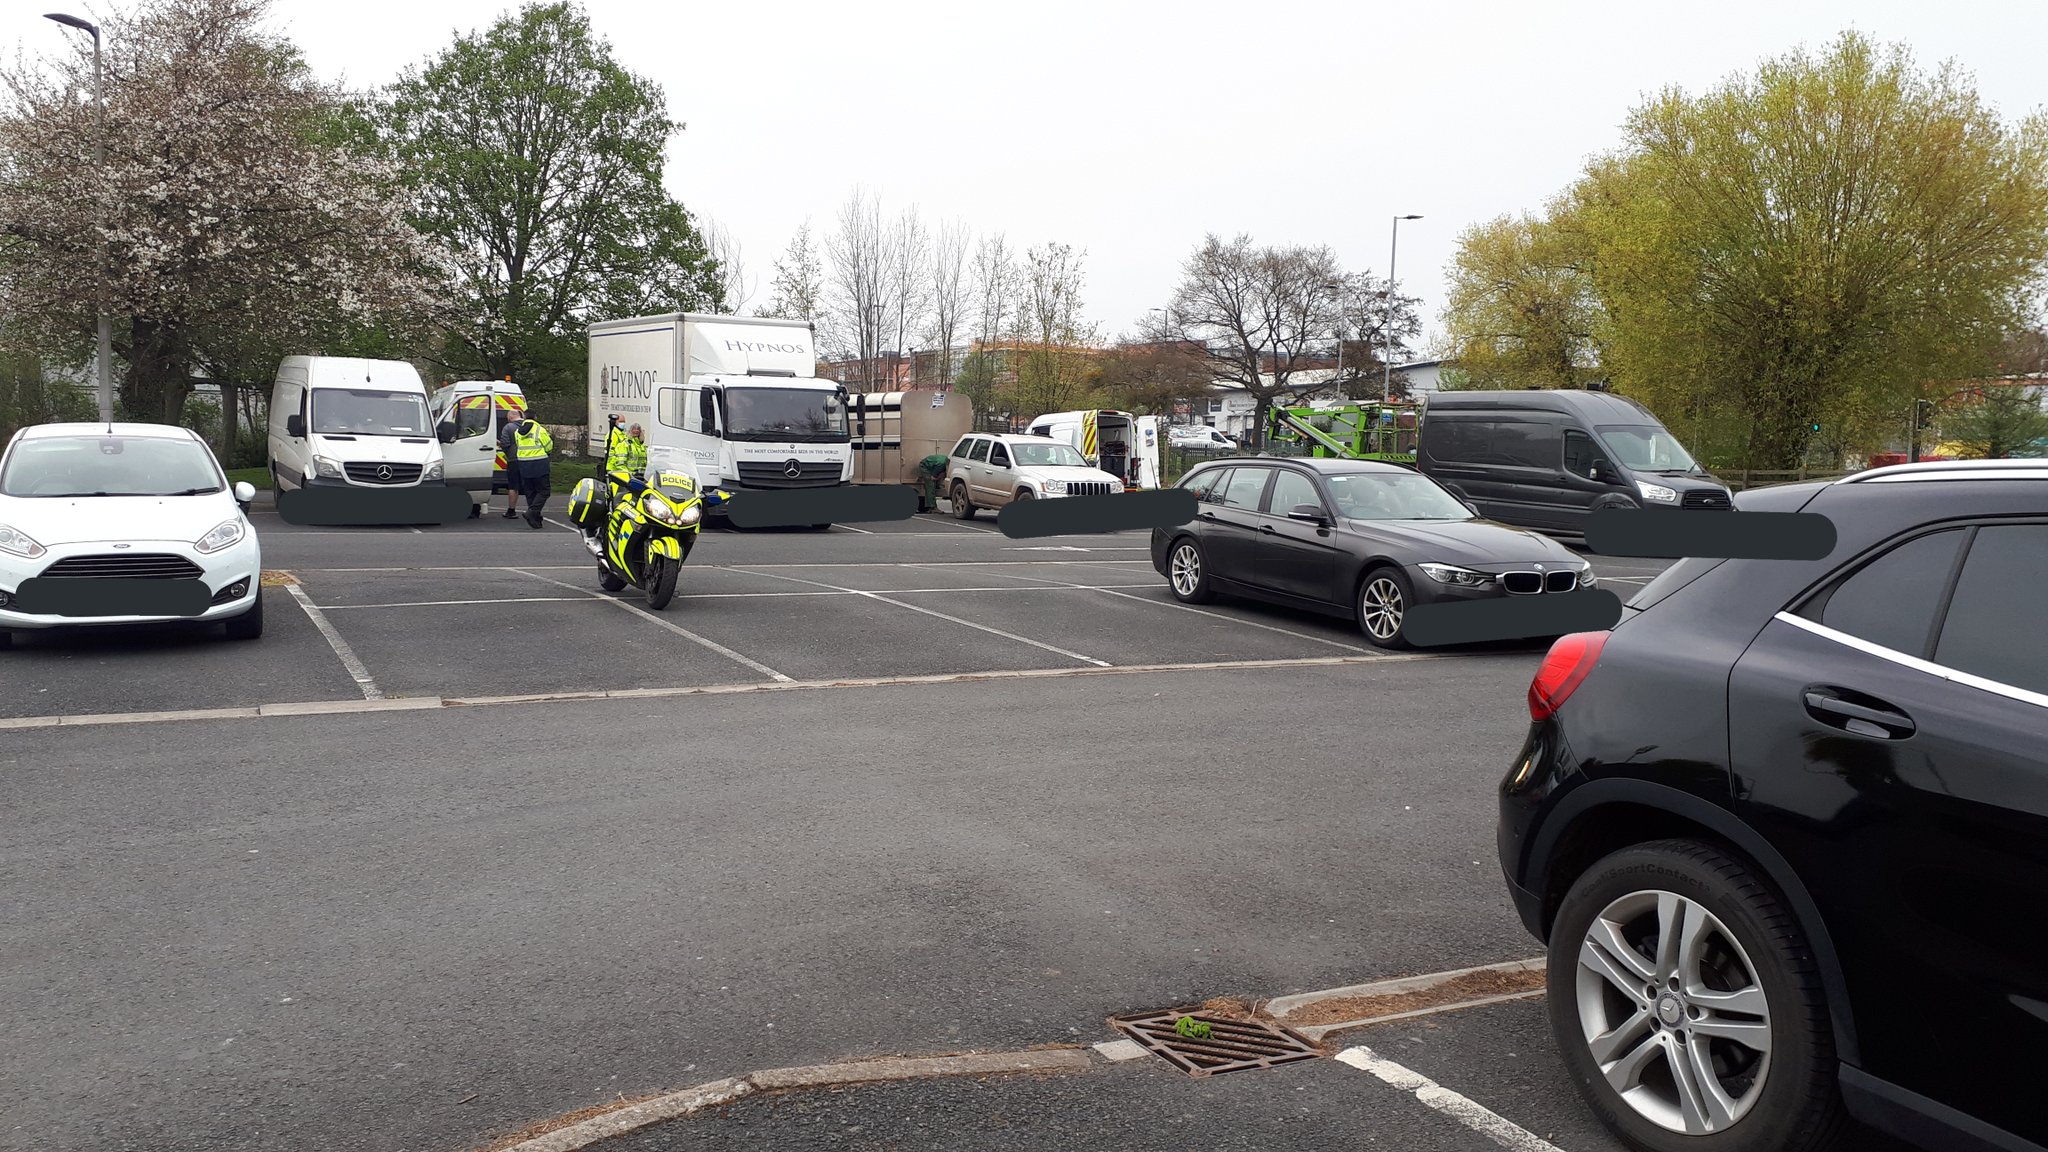 NEWS | Police have been carrying out checks on vehicles in Hereford today